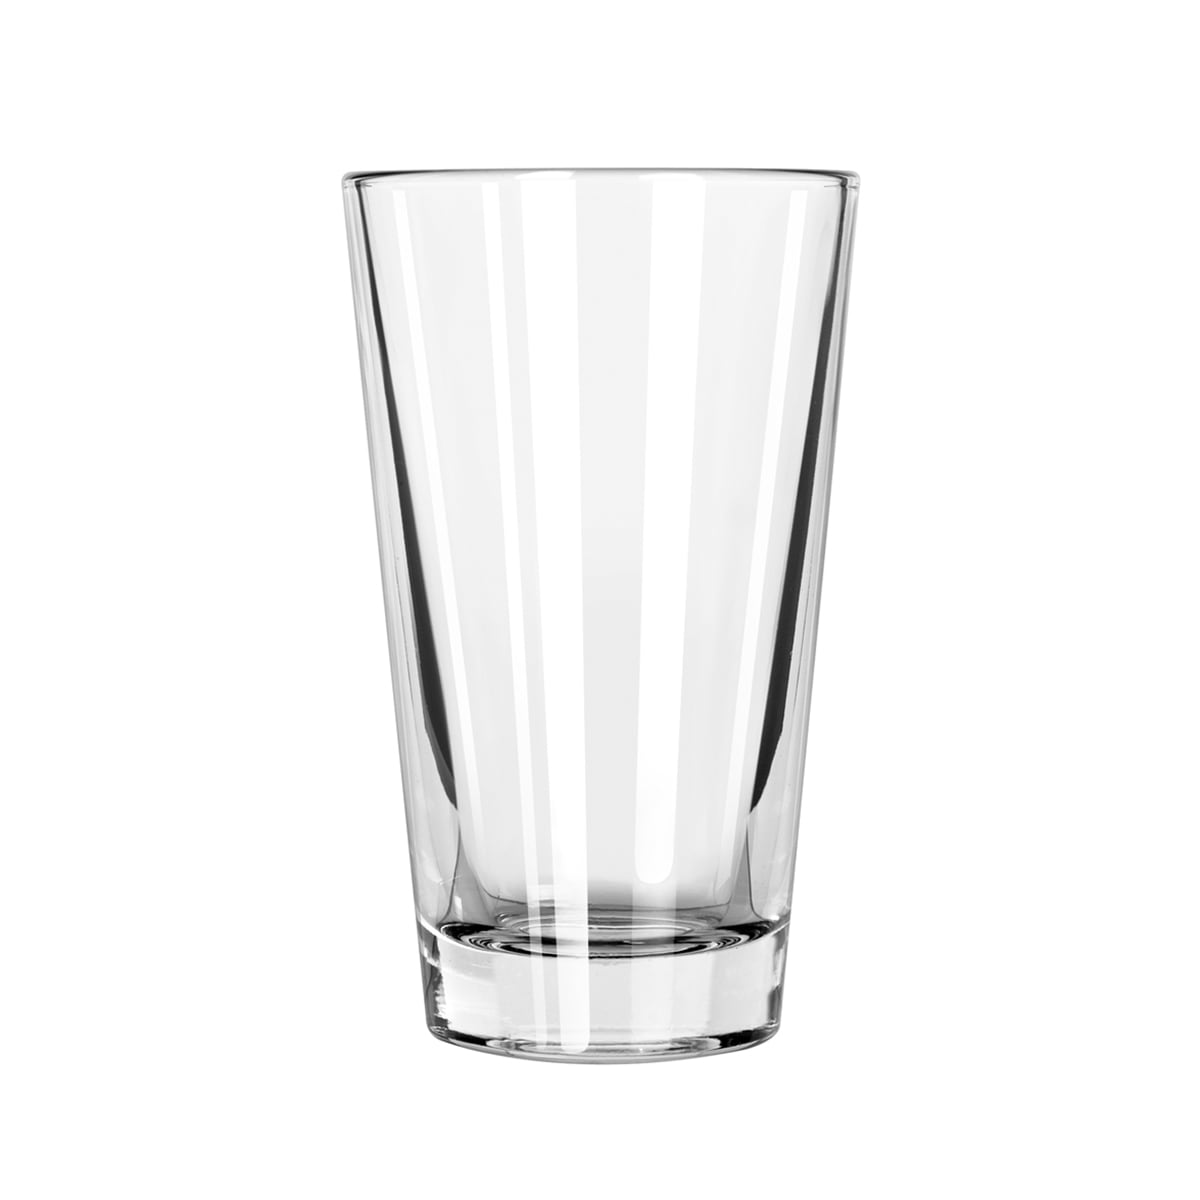 Libbey Glass Measuring/Mixing Glass 4 oz